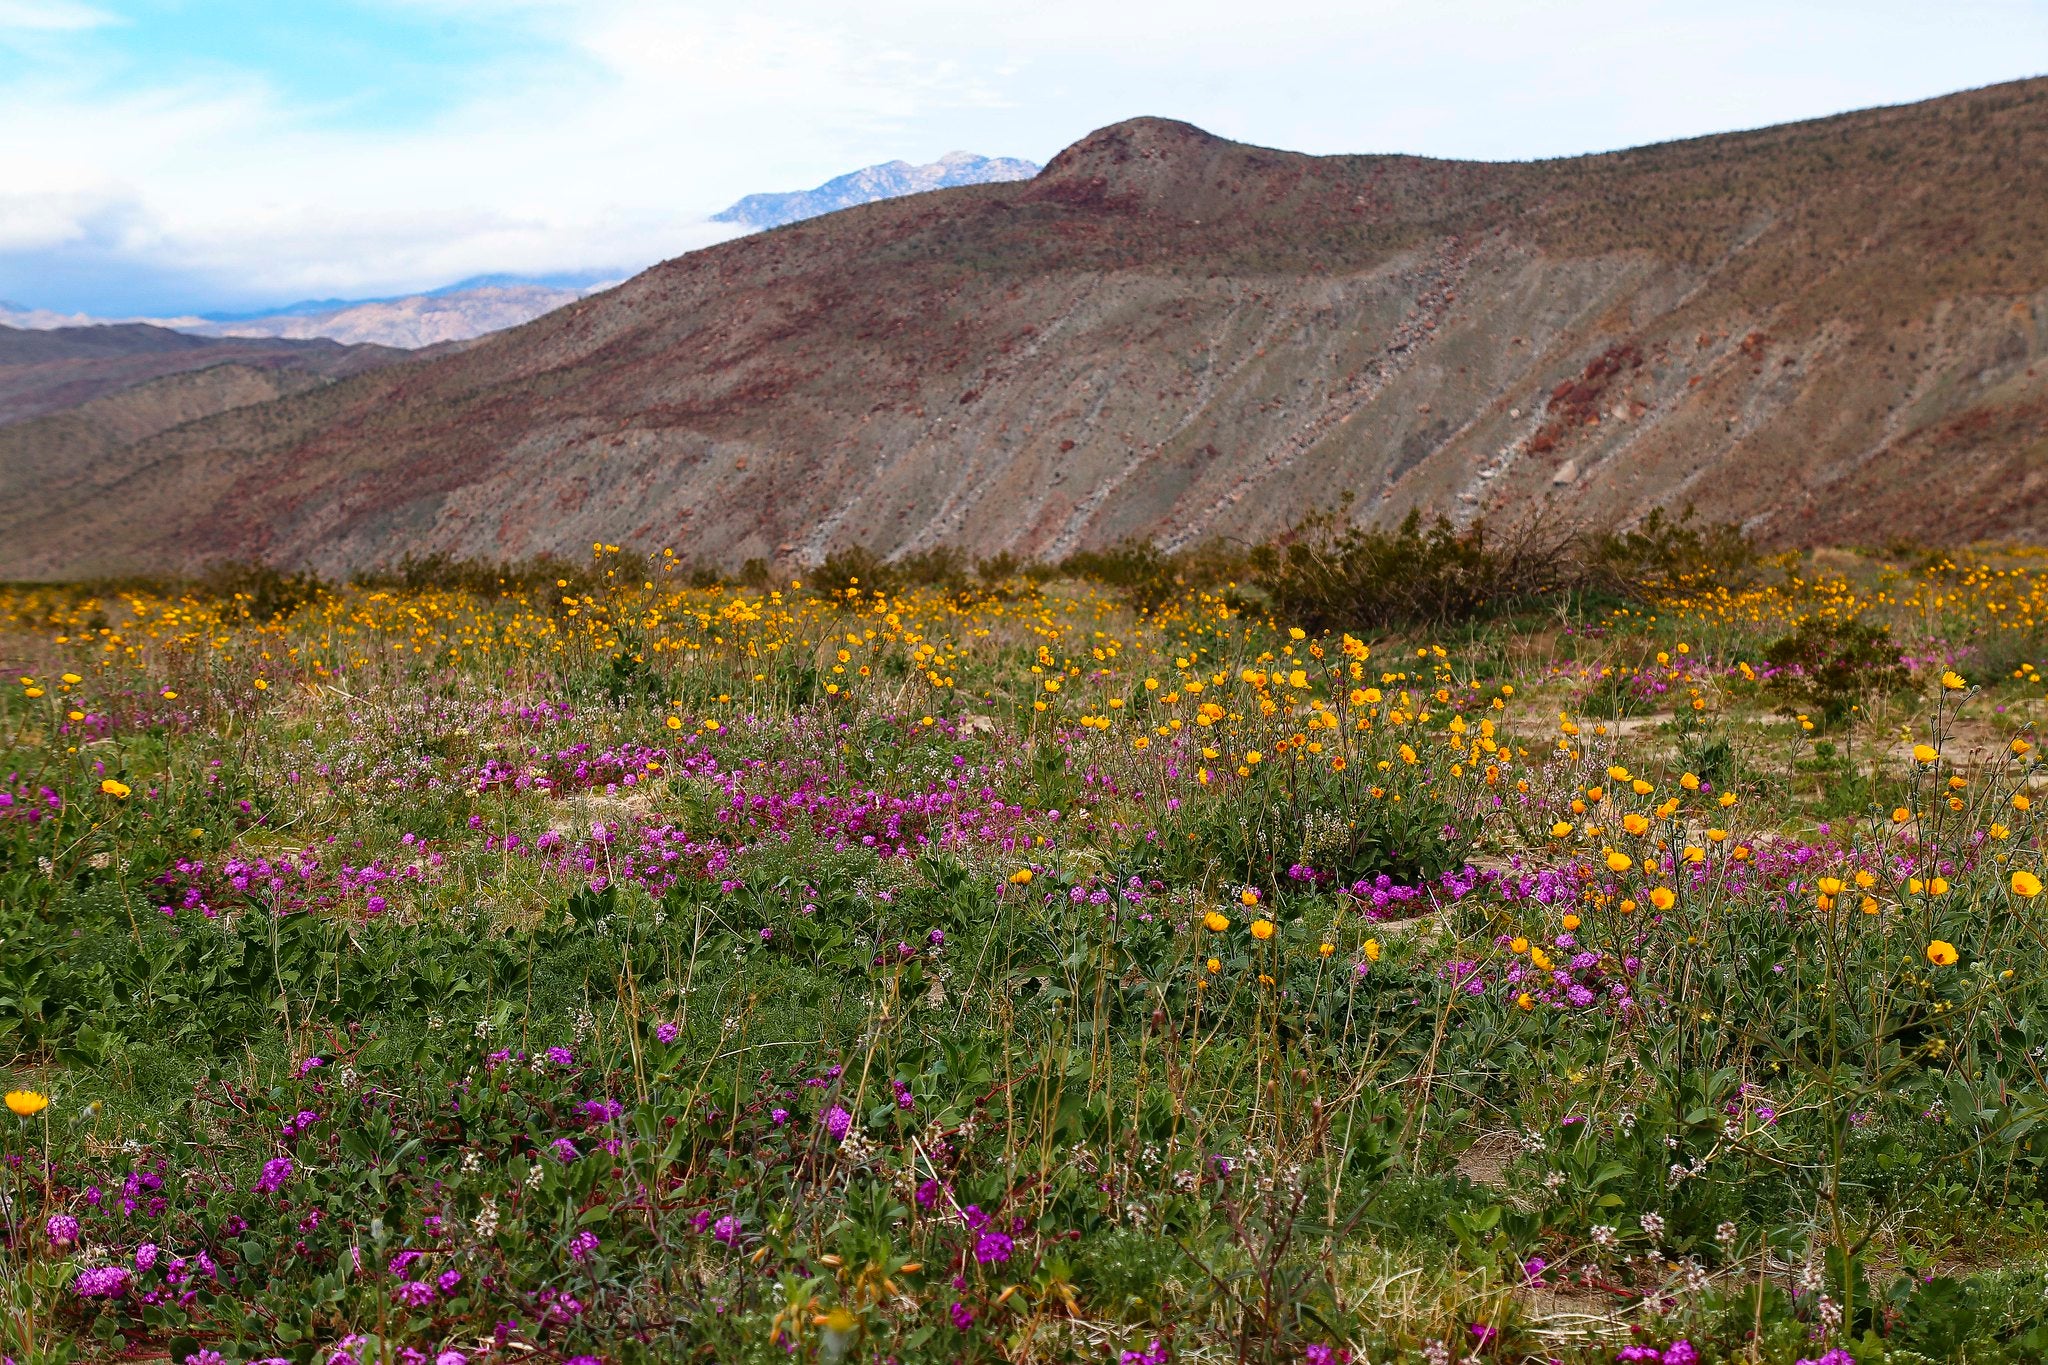 Purple and yellow wildfires blooming in California's Coyote Canyon with desert mountains in the distance.